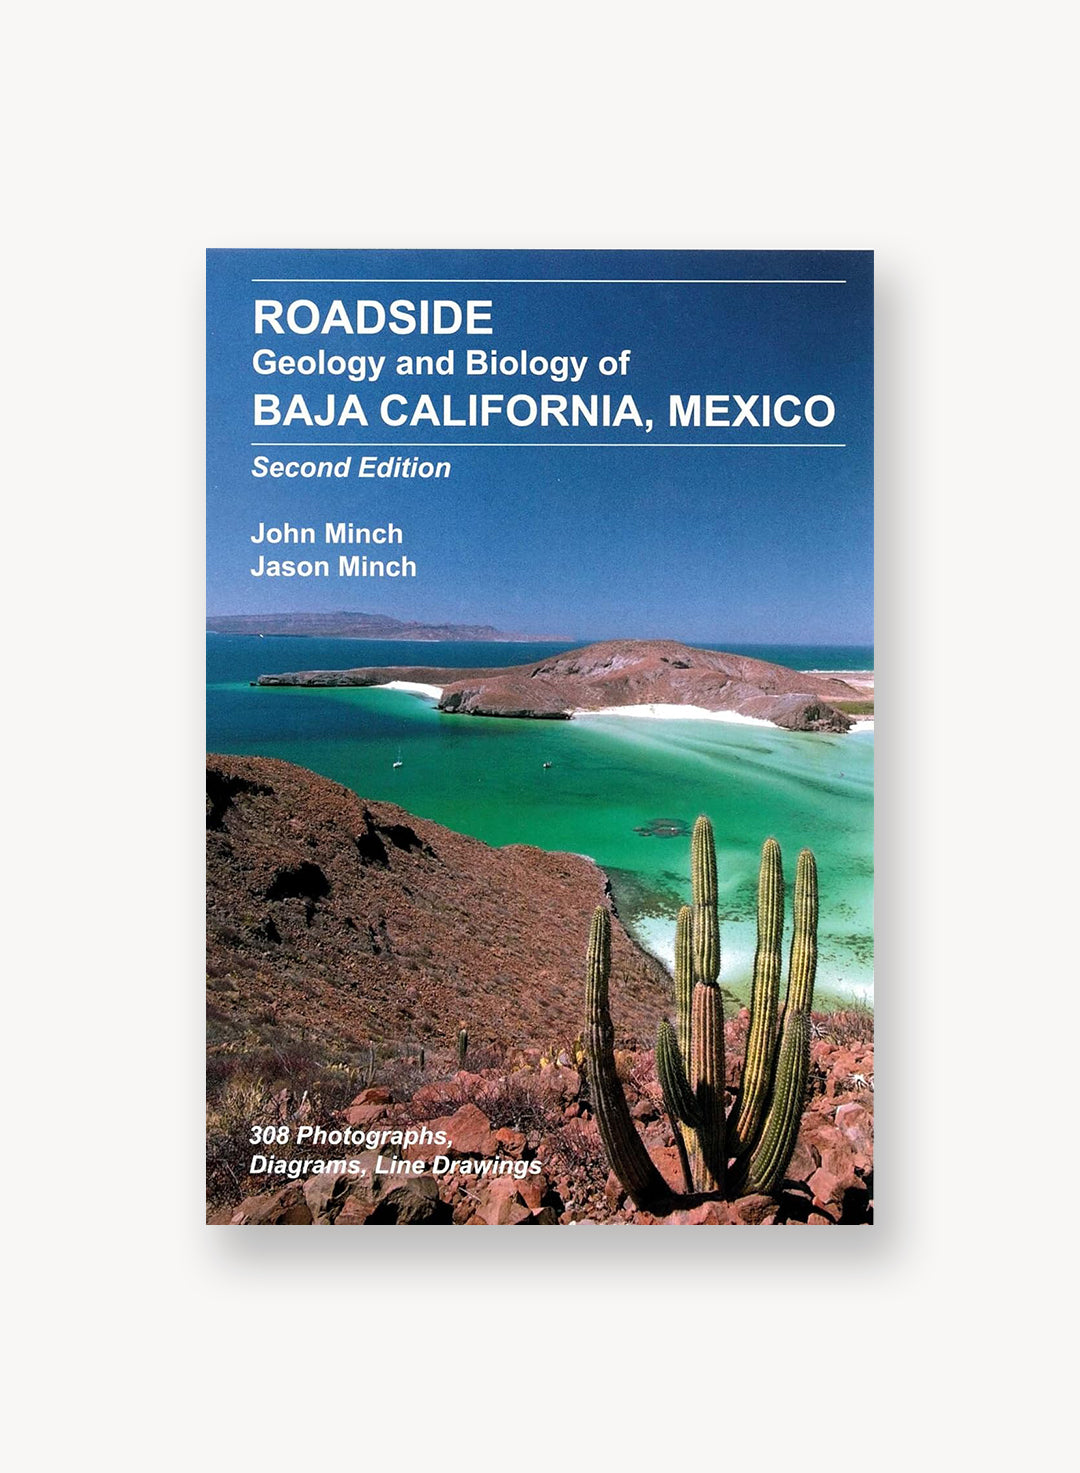 Roadside Geology and Biology of Baja California, Mexico, 2nd Edition